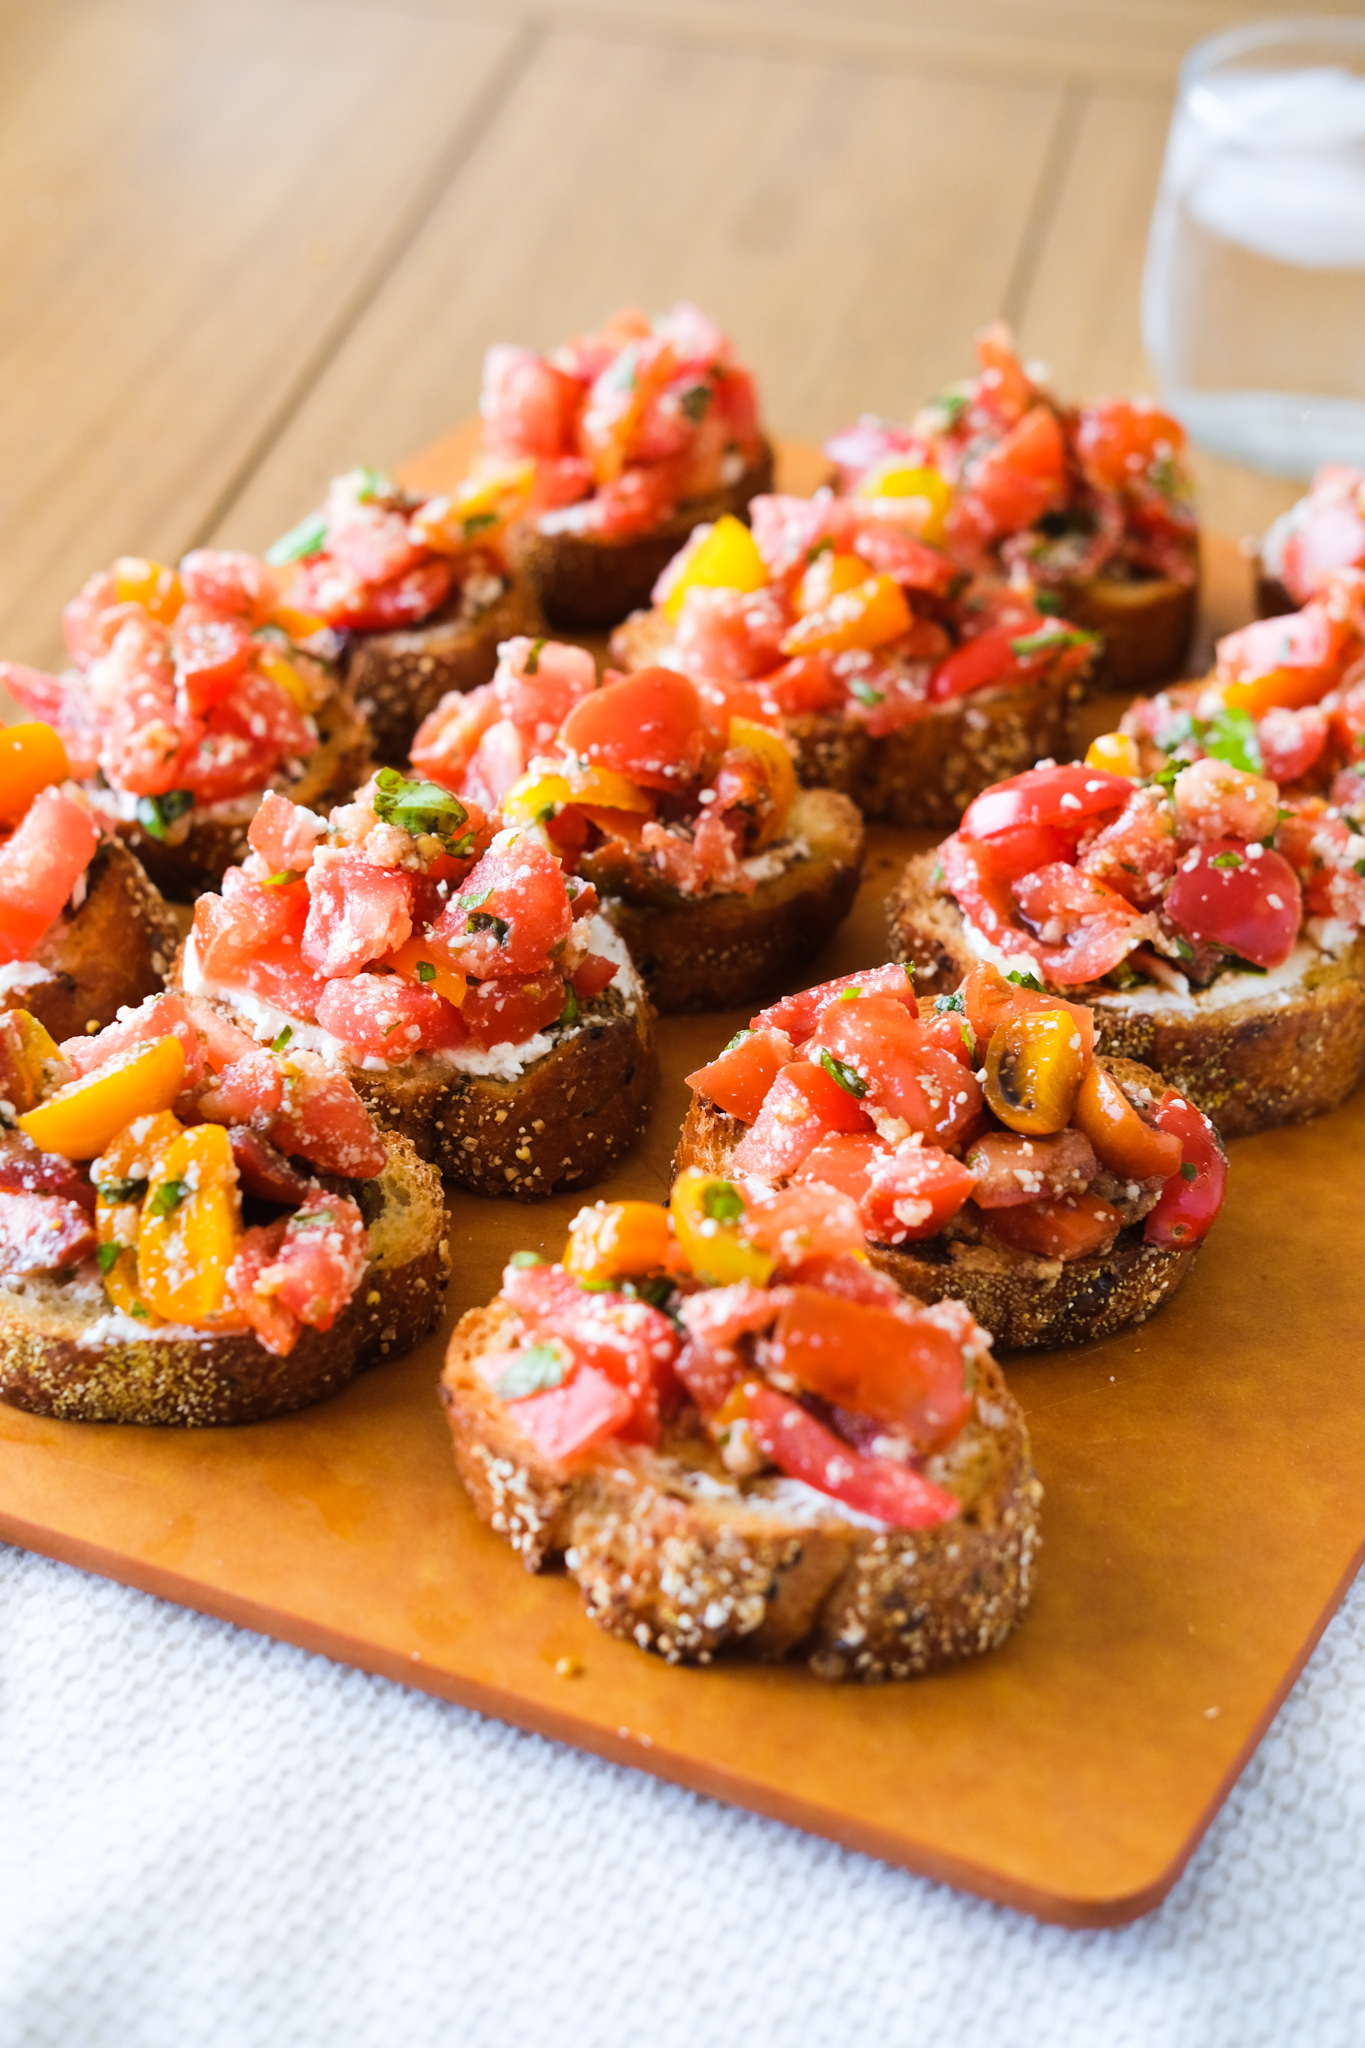 serving slices of bruschetta with fresh tomatoes and basil